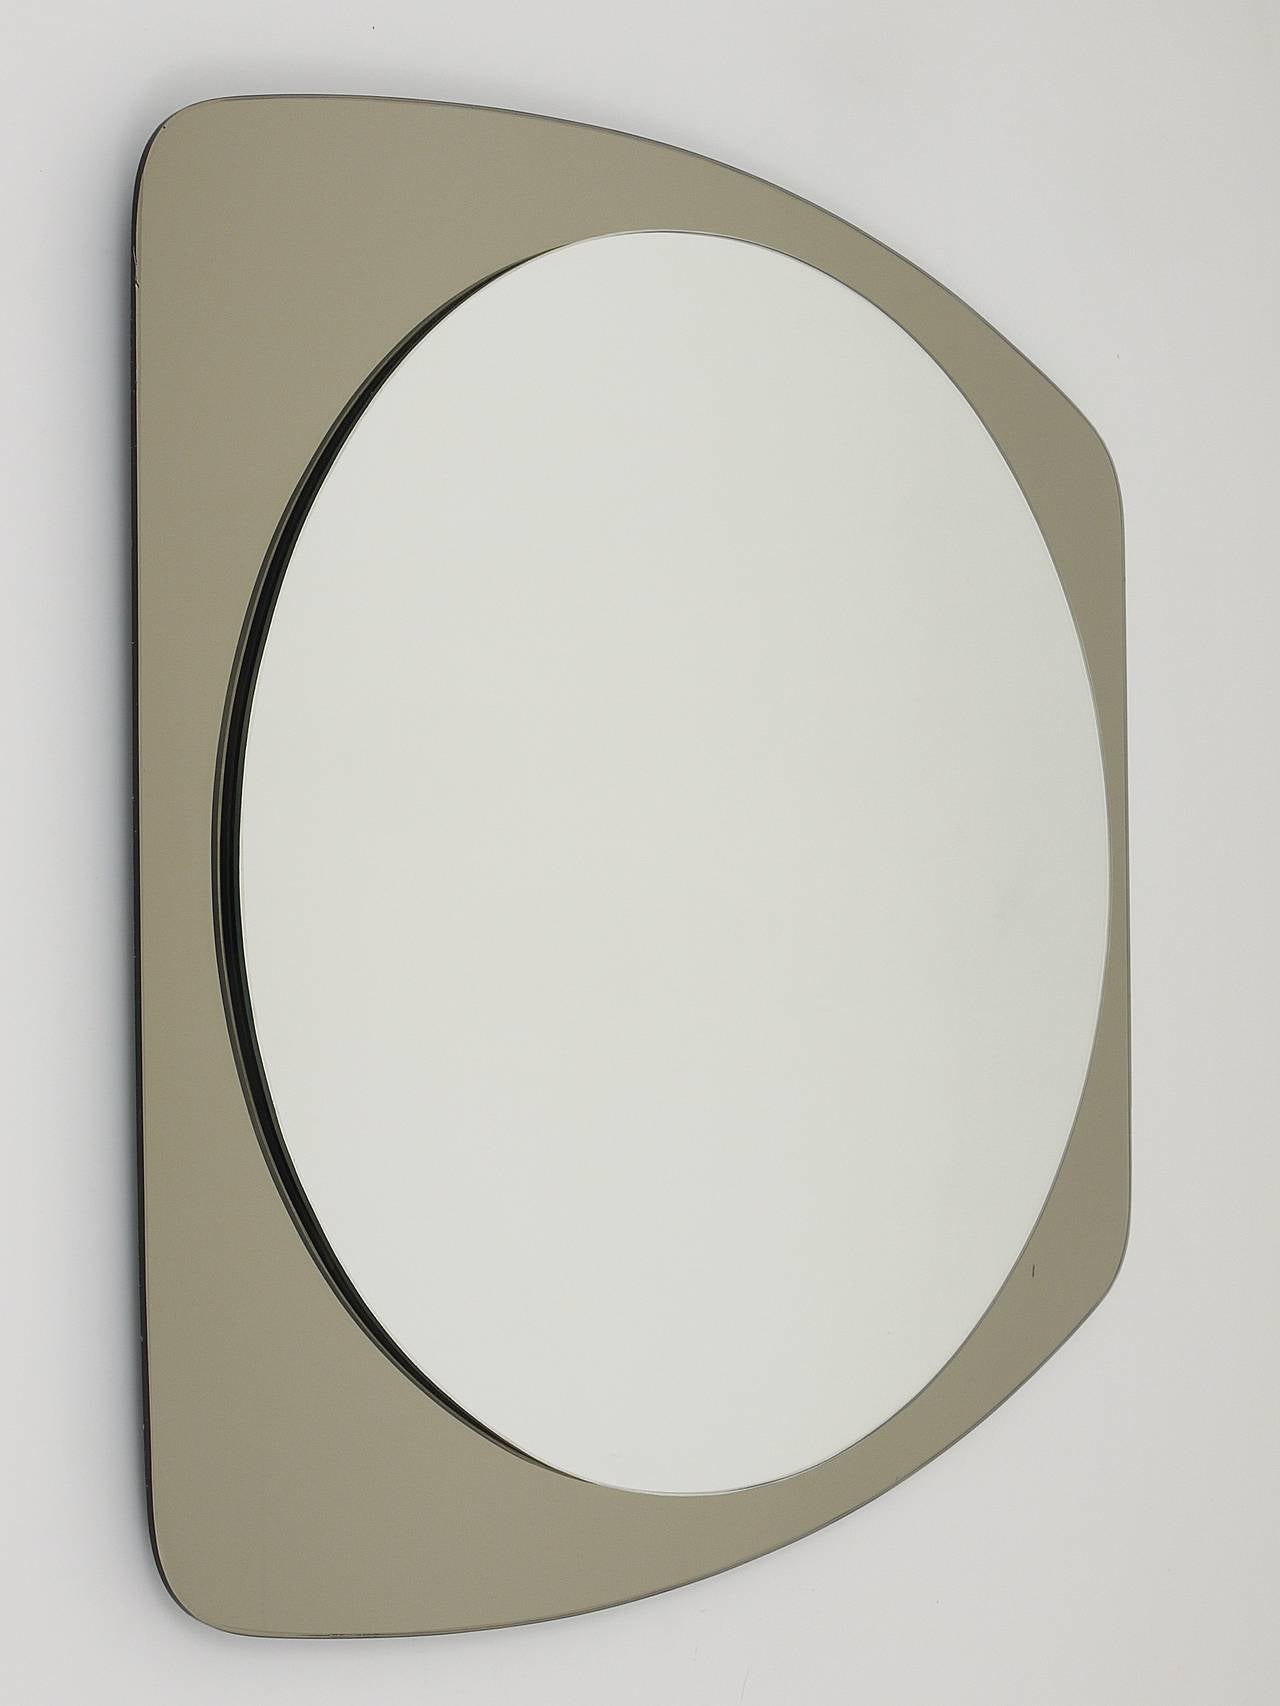 A beautiful double-levelled wall mirror from the 1970s, made in Italy by Cristal Arte / Crystal Arte. Oval mirror with a grey smoked rectangular backplate glass with rounded corners. Excellent condition, please notice that there is a little spot on